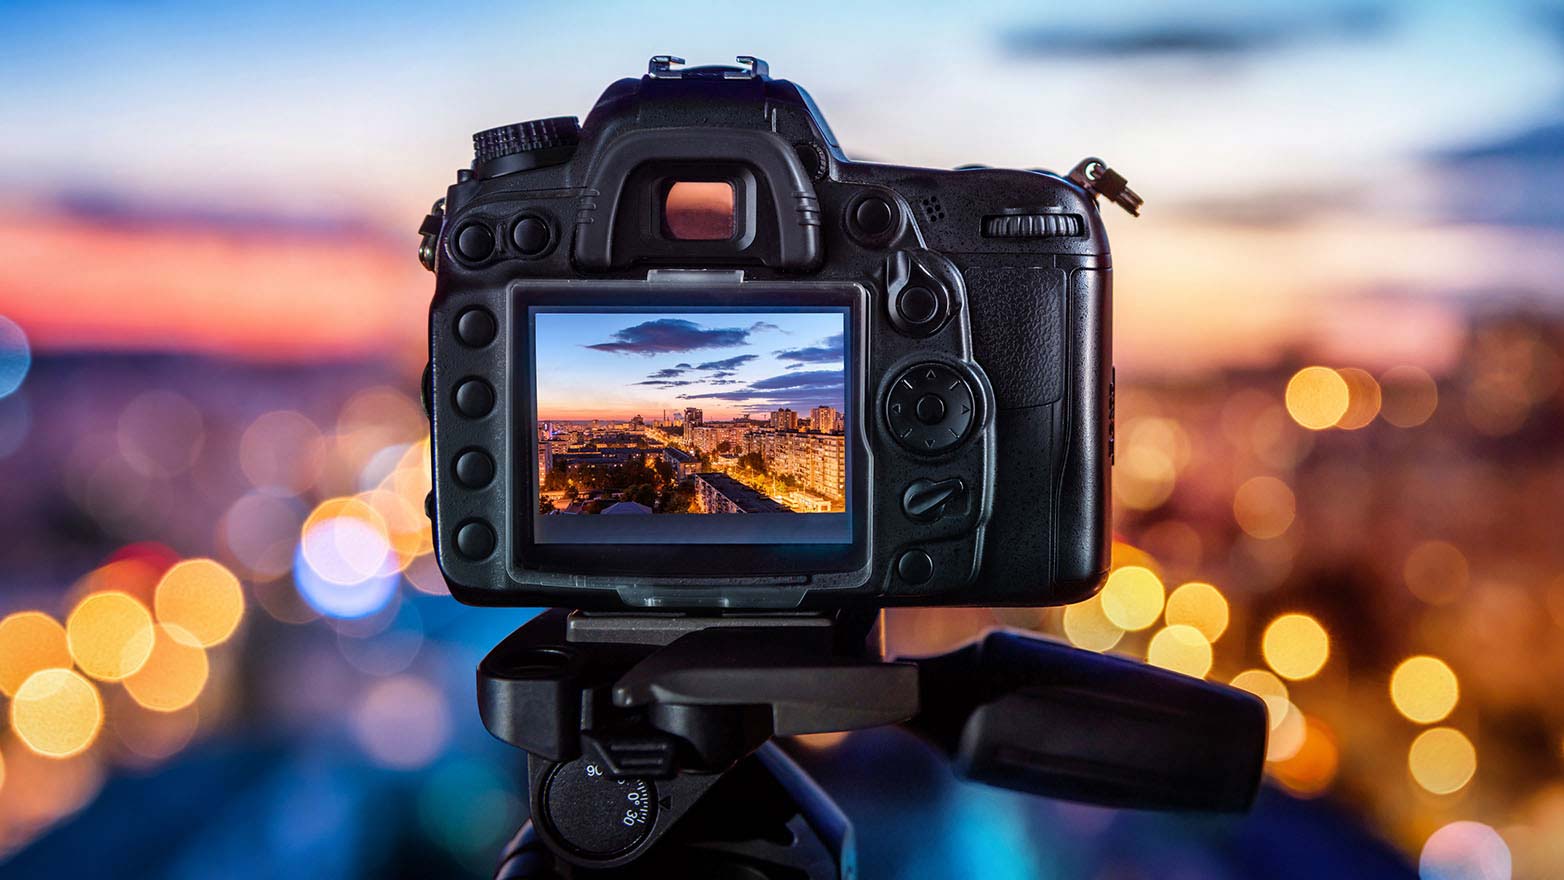 camera on a tripod overlooking the city at night